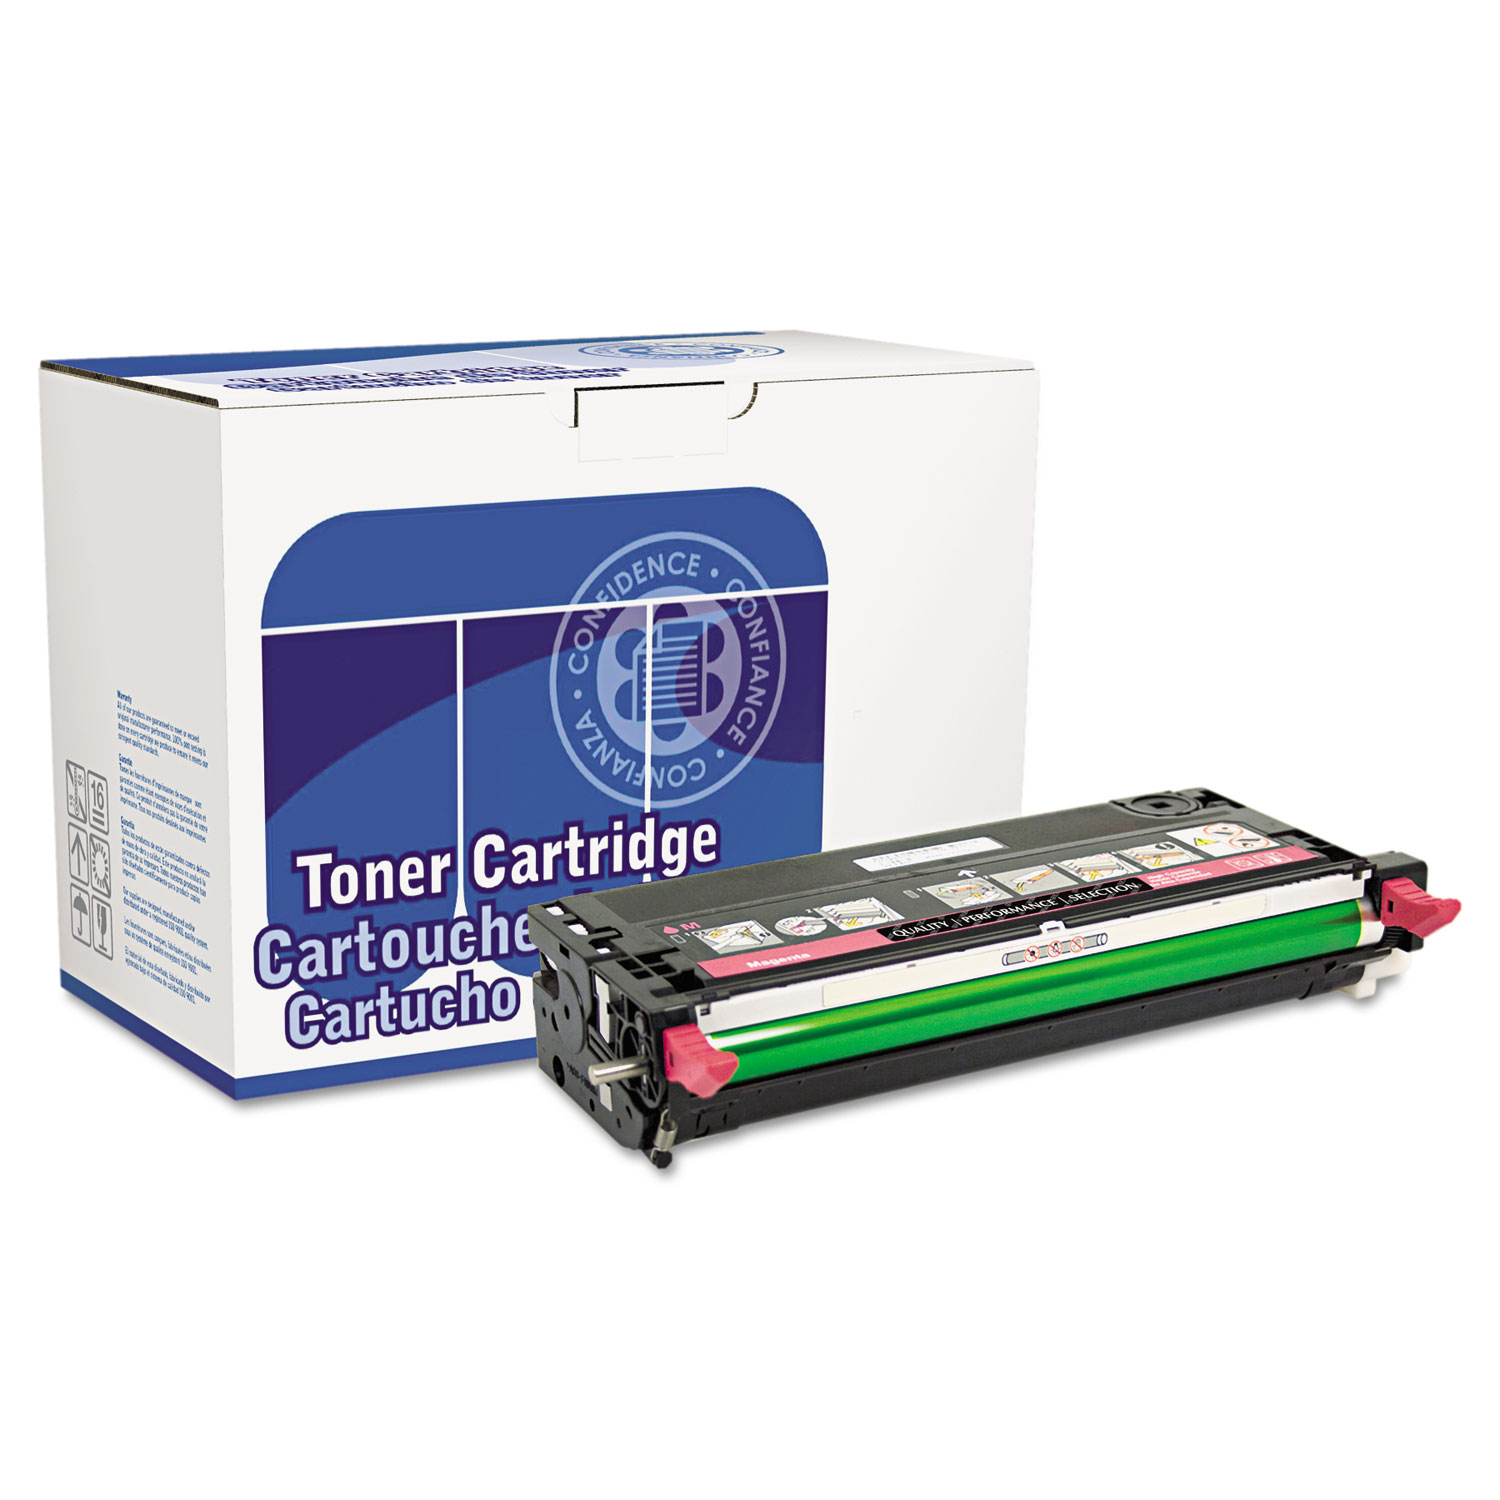 Remanufactured 310-8399 (3115M) High-Yield Toner, 8,000 Page-Yield, Magenta